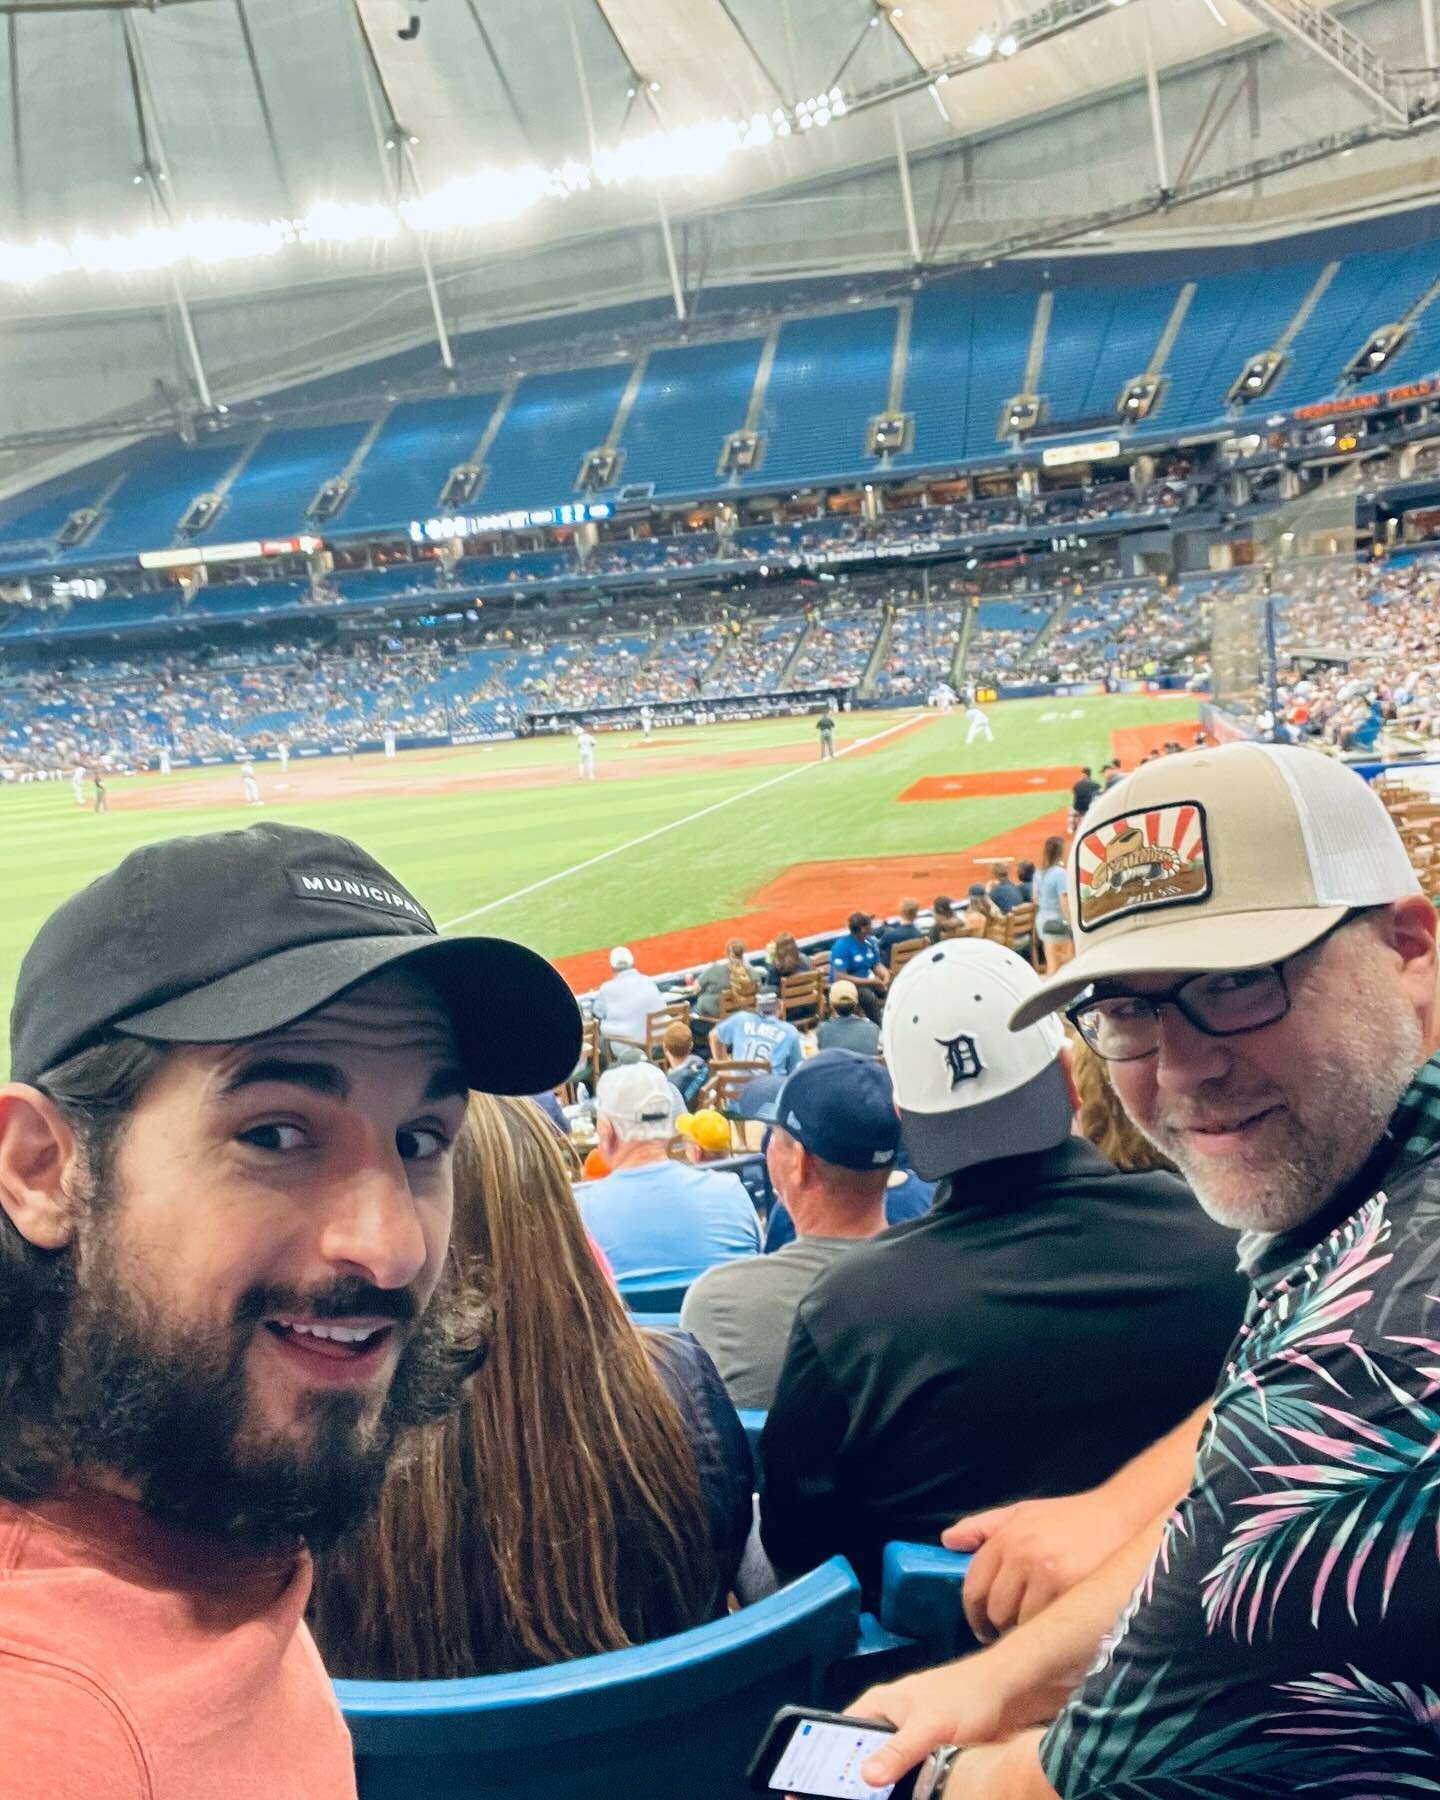 Rays against the Tigers! TB got the W! Impromptu side quest with @jmthesoundguy between @thethornofficial show dates @mlb @tropicanafield @raysbaseball